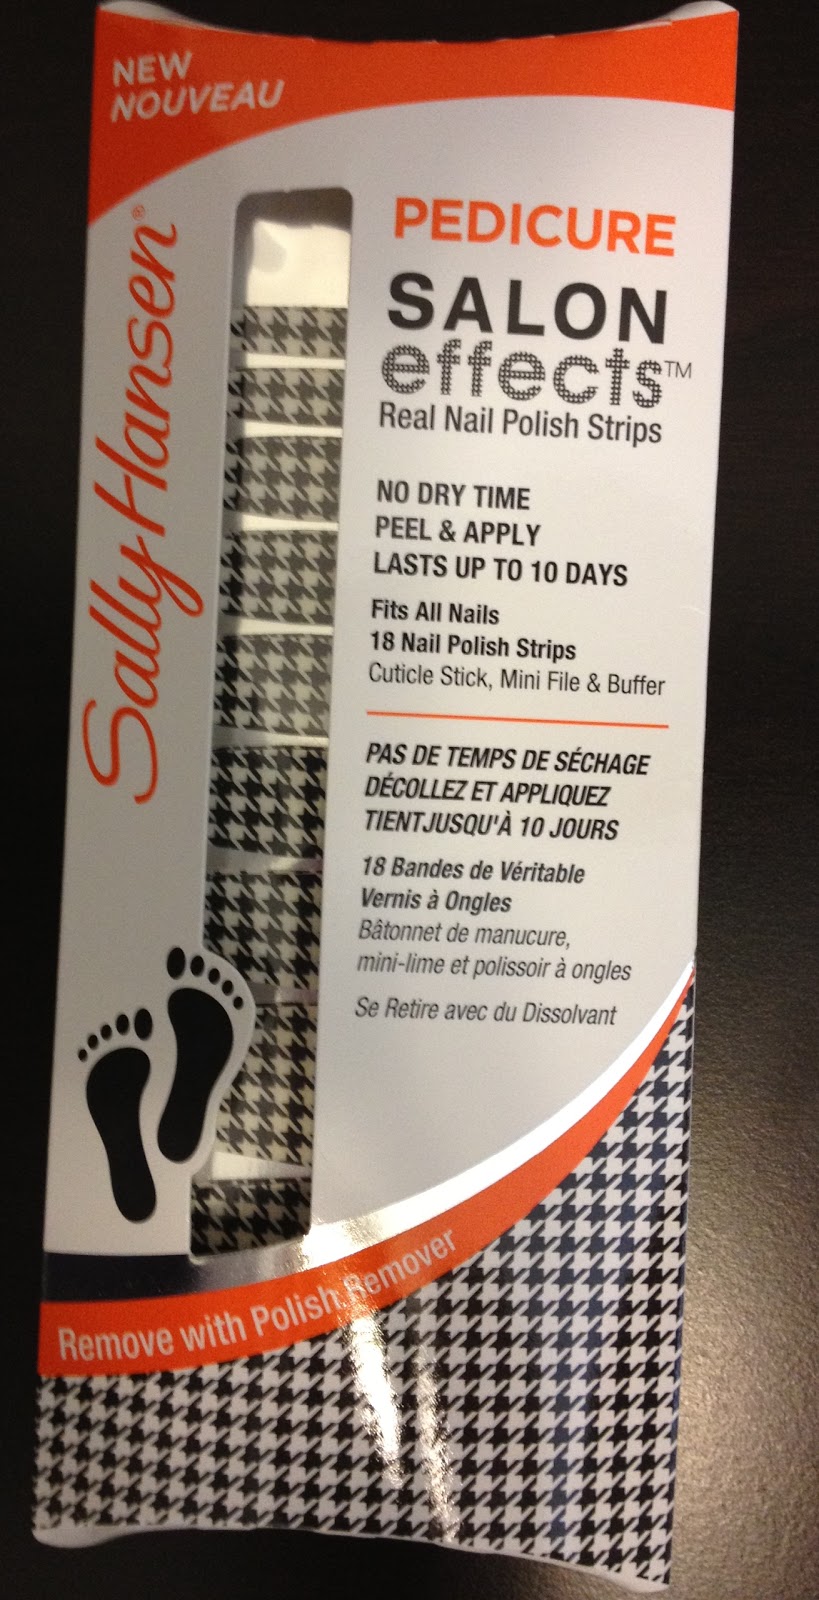 Sally now has nail polish strips for your toes. How awesome is that